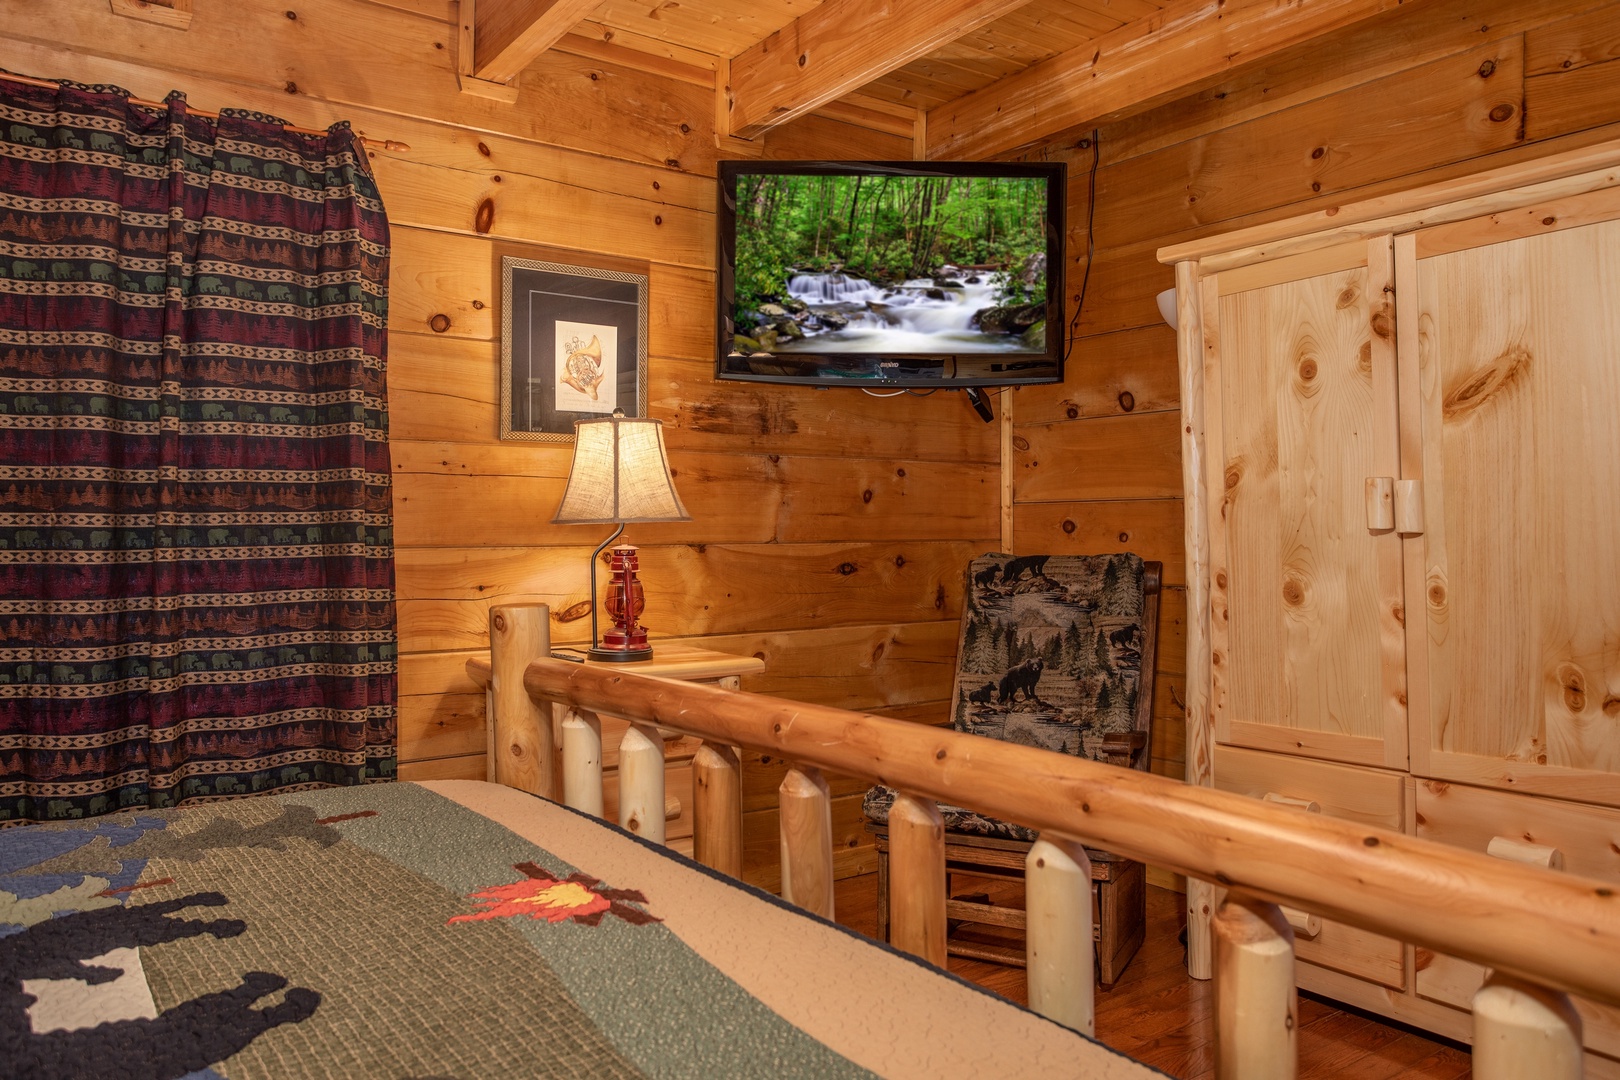 Armoire and TV in a bedroom at Mountain Music, a 5 bedroom cabin rental located in Pigeon Forge